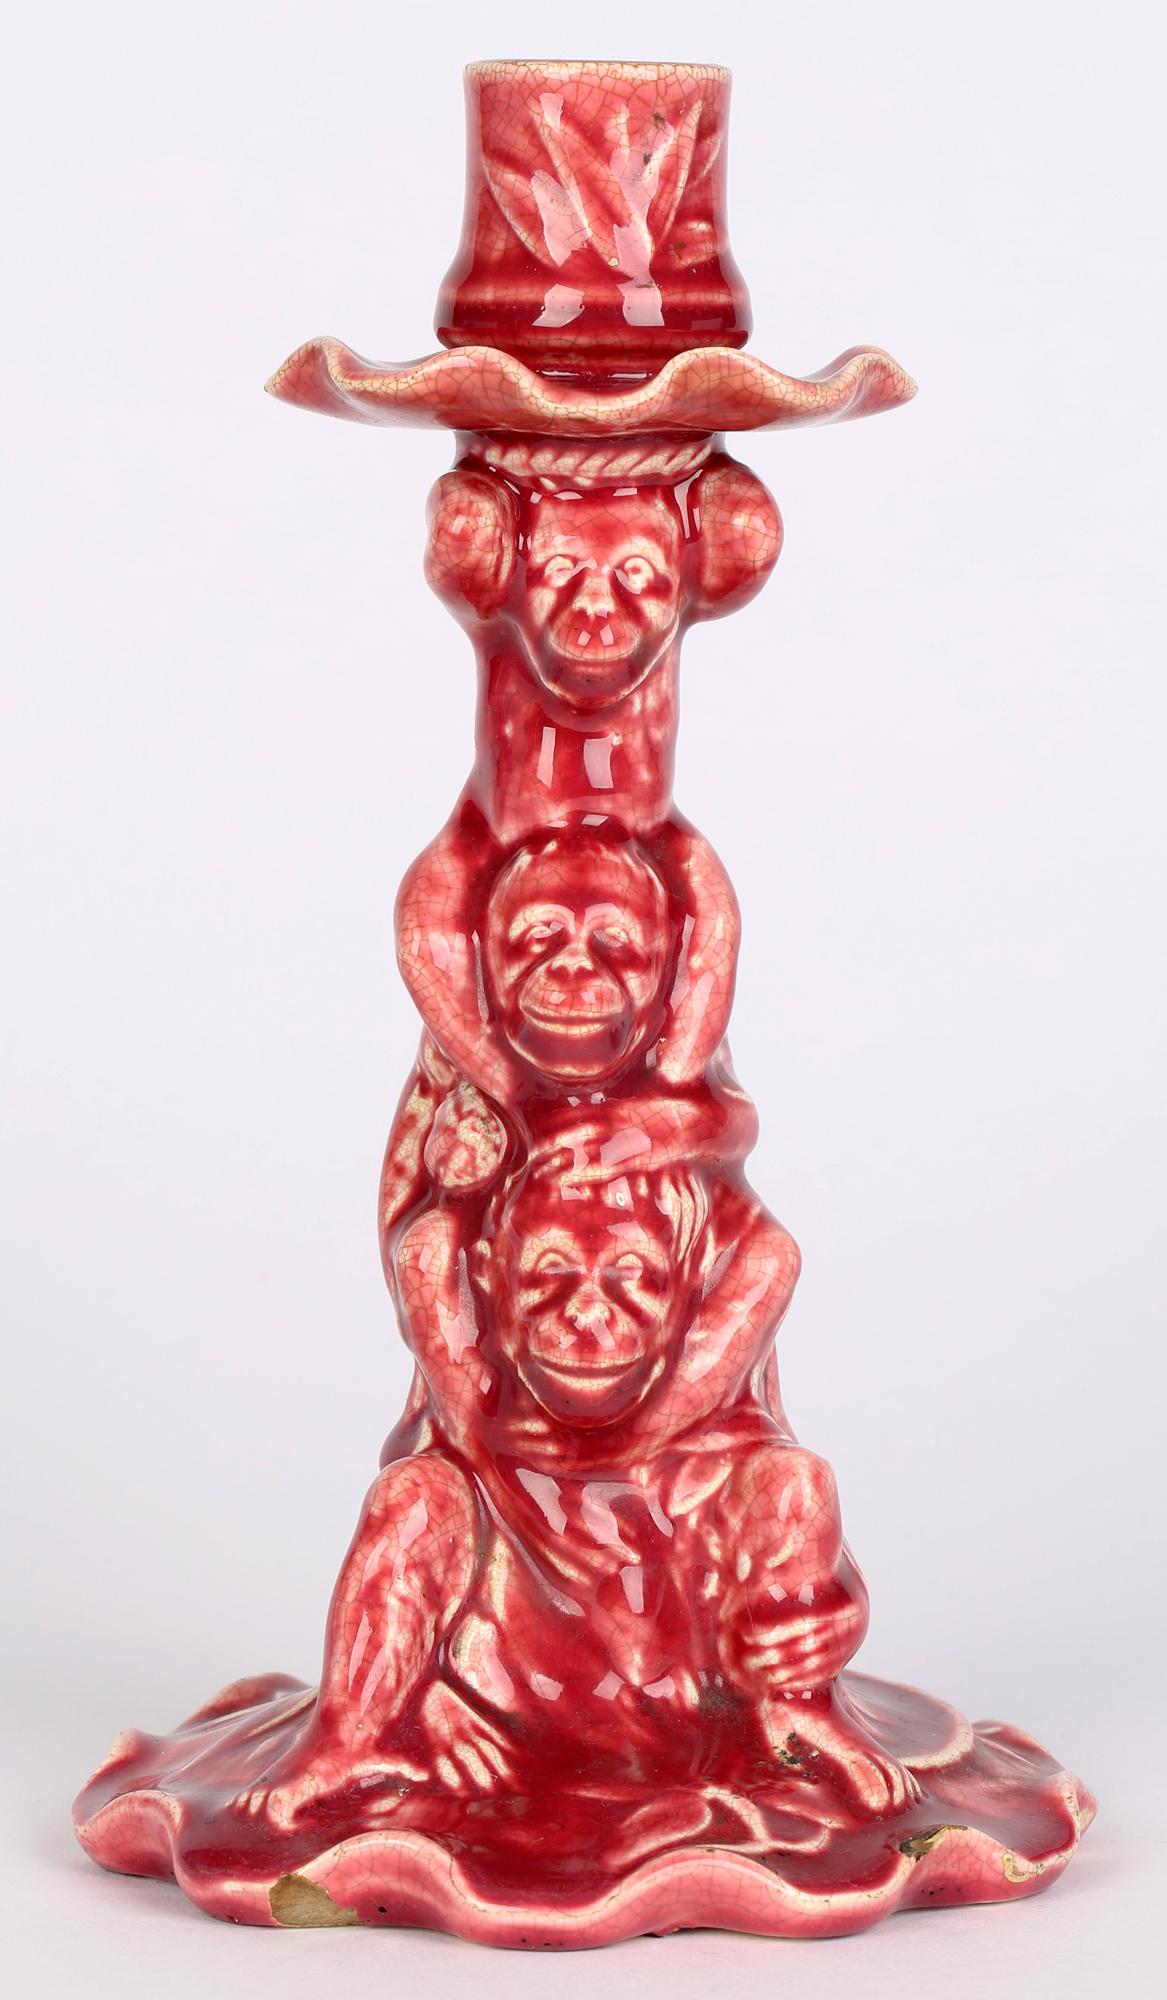 Minton Aesthetic Movement Plum Red Glazed Art Pottery Monkey Candlestick For Sale 1